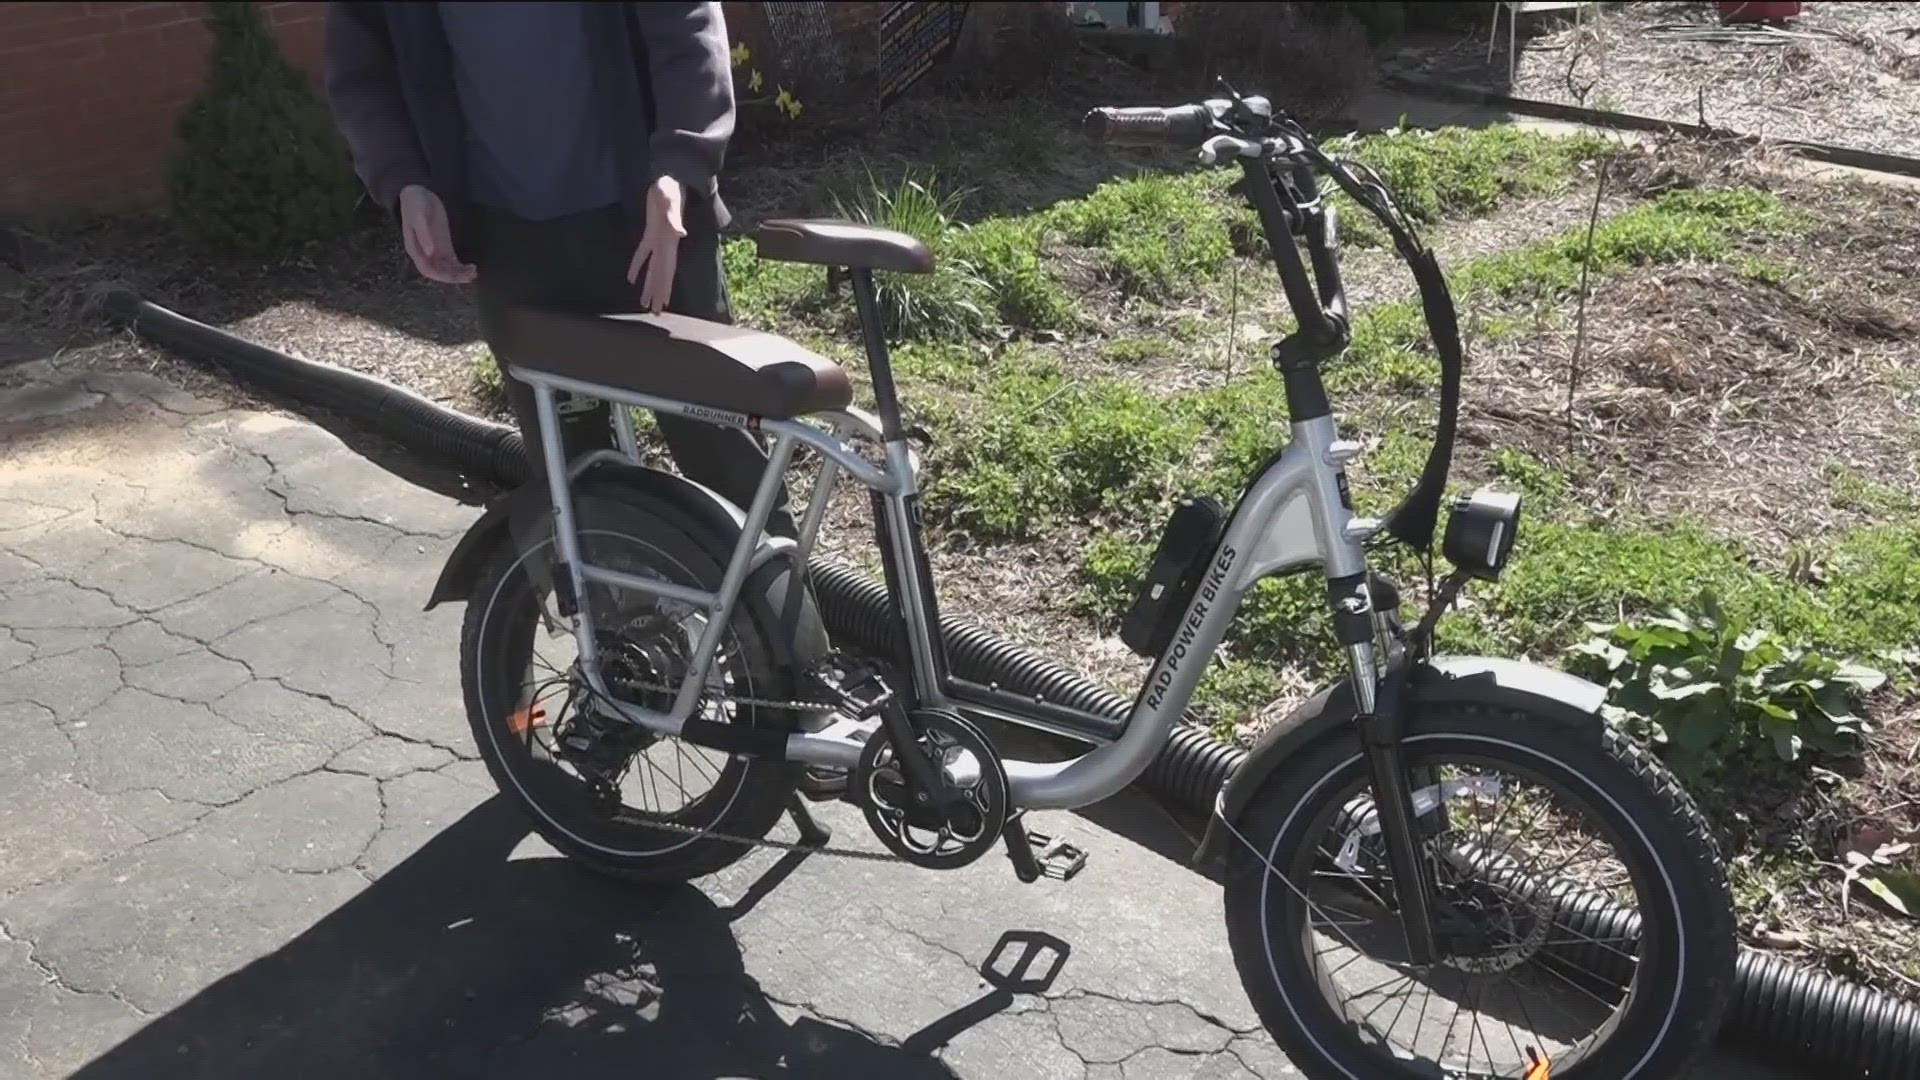 Just hours apart, two people were seriously injured in separate accidents as they were riding e-bikes: one in Shelltown, the other in the Gaslamp.